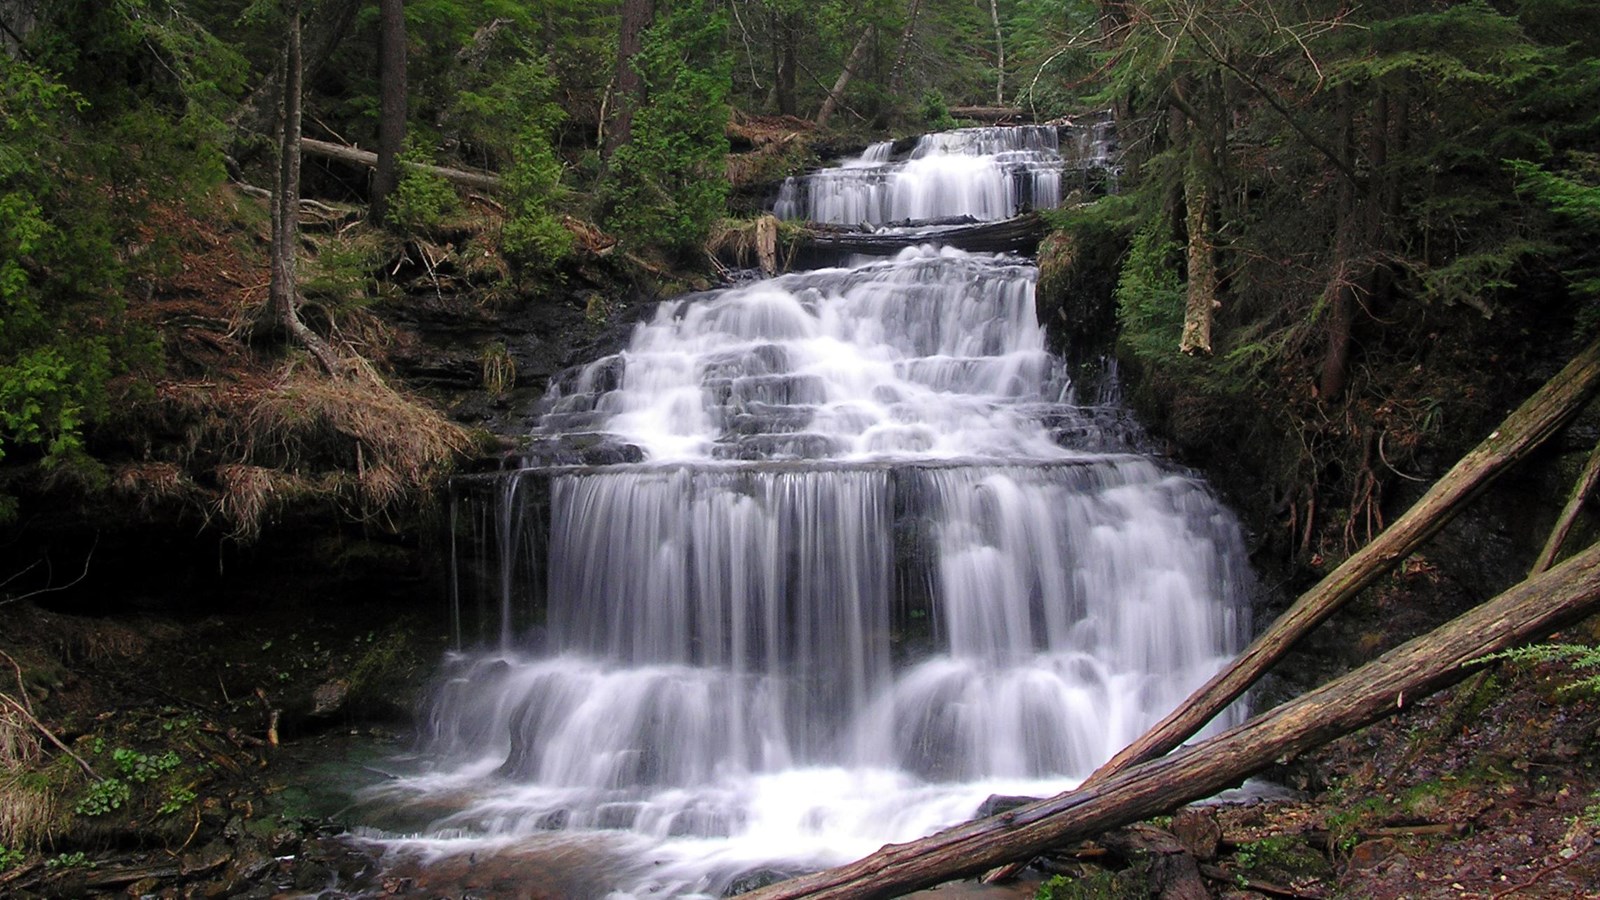 Water cascades over several rock ledges flanked by dense forest